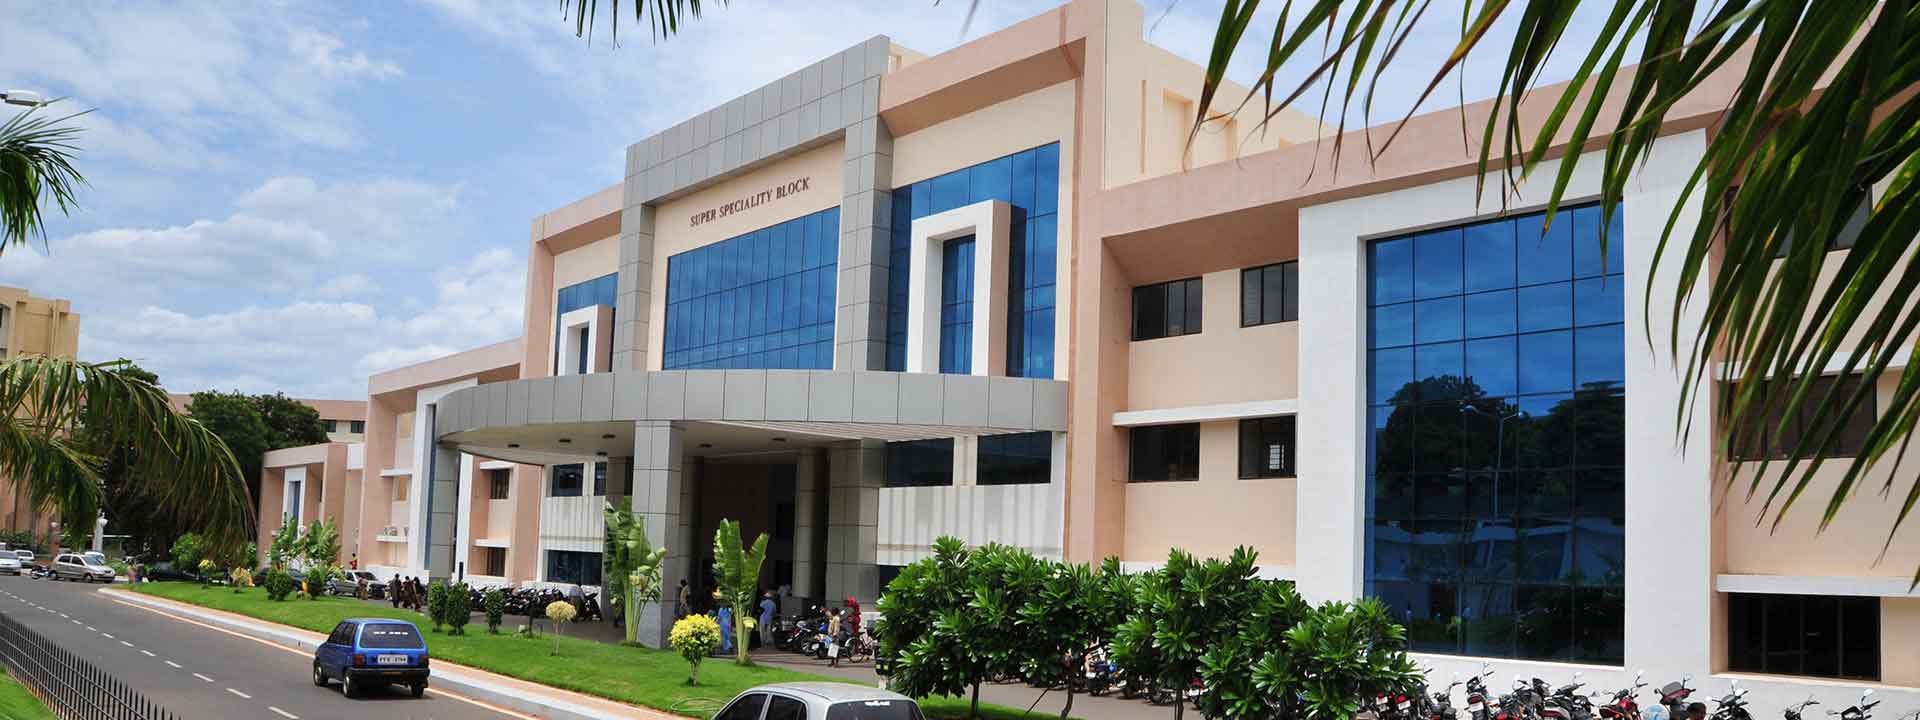 Jipmer super speciality hospital in Puducherry- L&T Construction